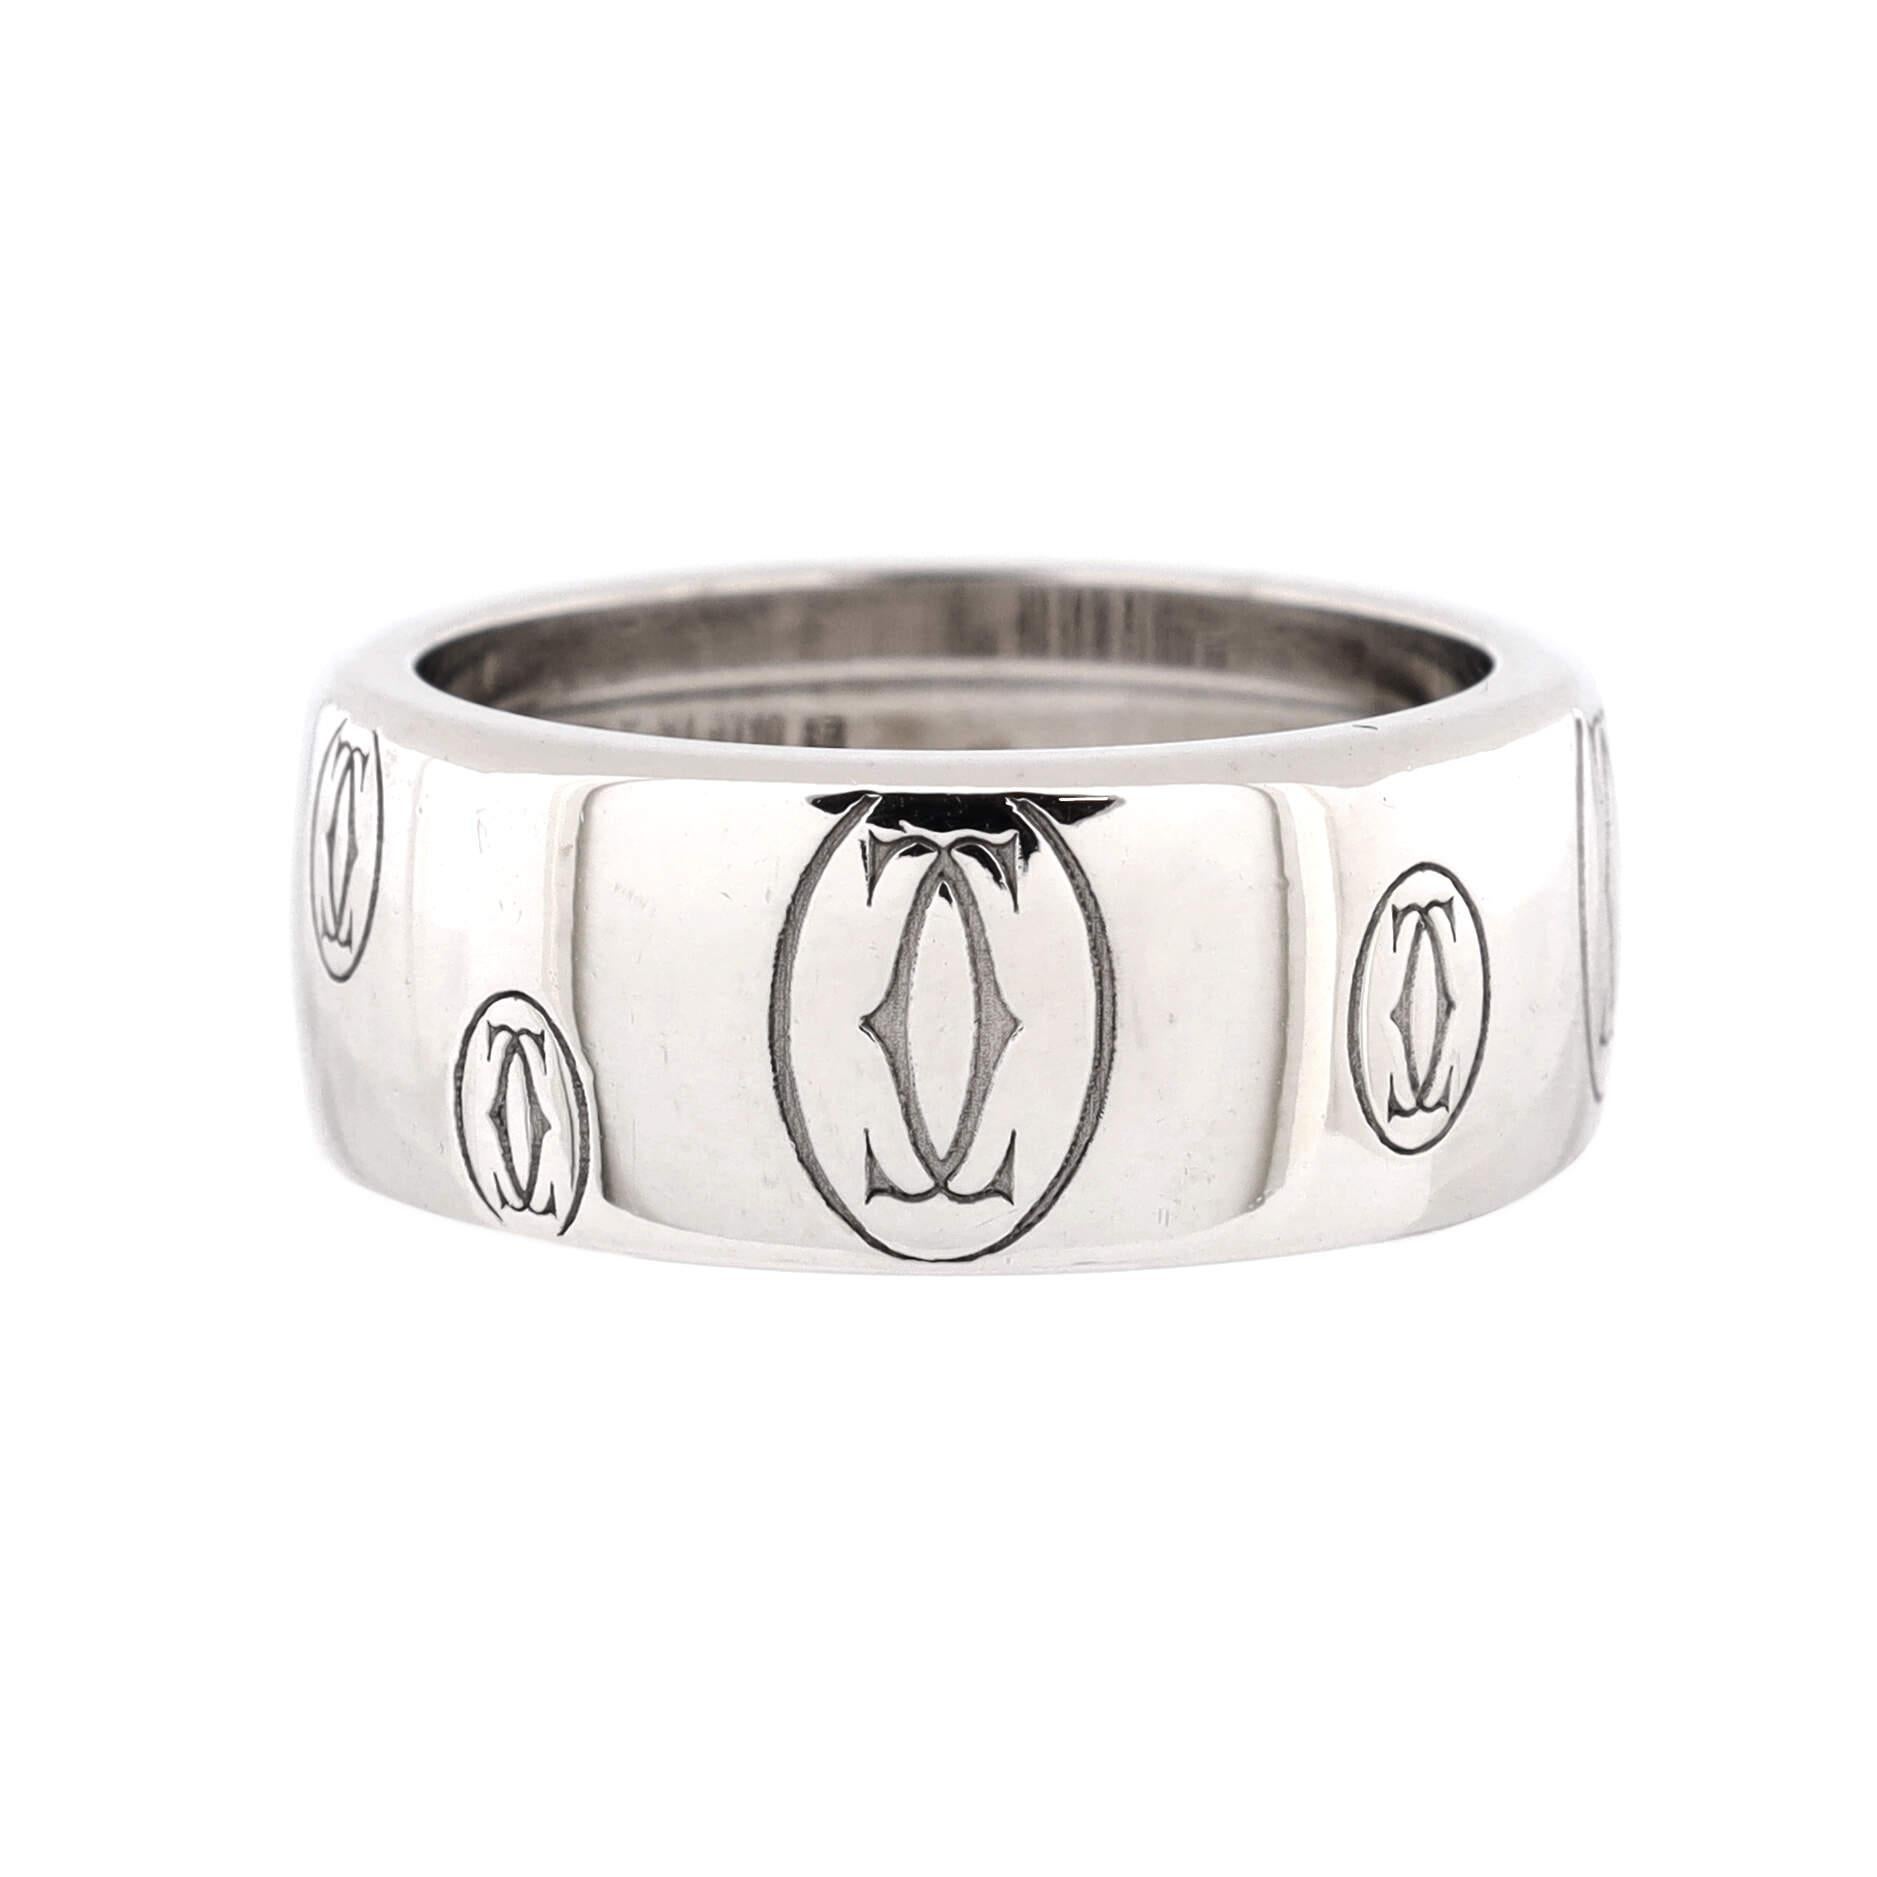 Condition: Very good. Moderate wear throughout.
Accessories: No Accessories
Measurements: Size: 6 - 52, Width: 8.00 mm
Designer: Cartier
Model: C de Cartier Happy Birthday Band Ring 18K White Gold with Diamonds 8mm
Exterior Color: White Gold
Item